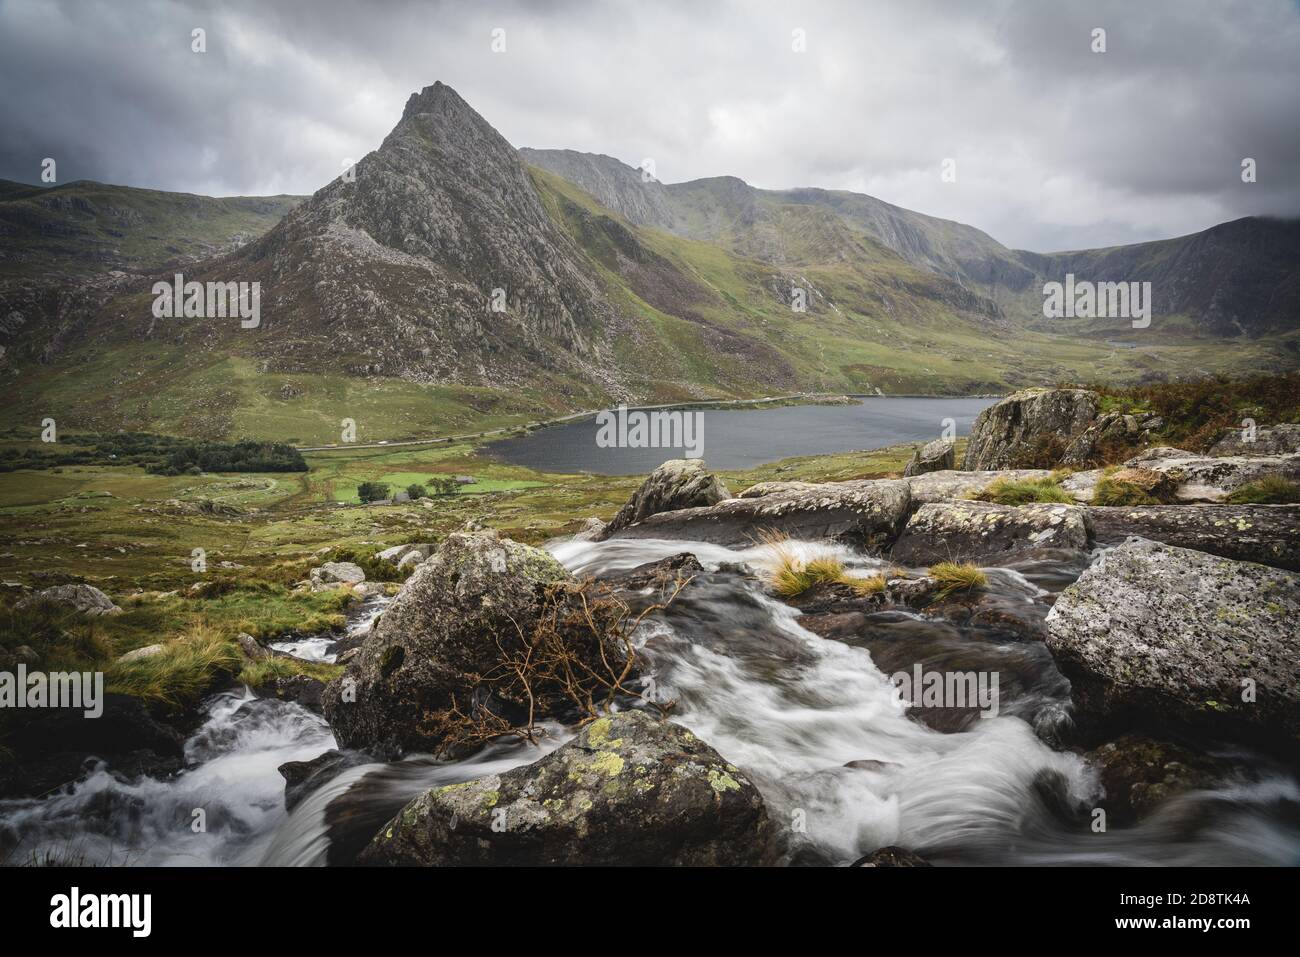 View of Tryfan and the Glyderau range with Llyn Ogwen in Snowdonia National Park, Wales Stock Photo